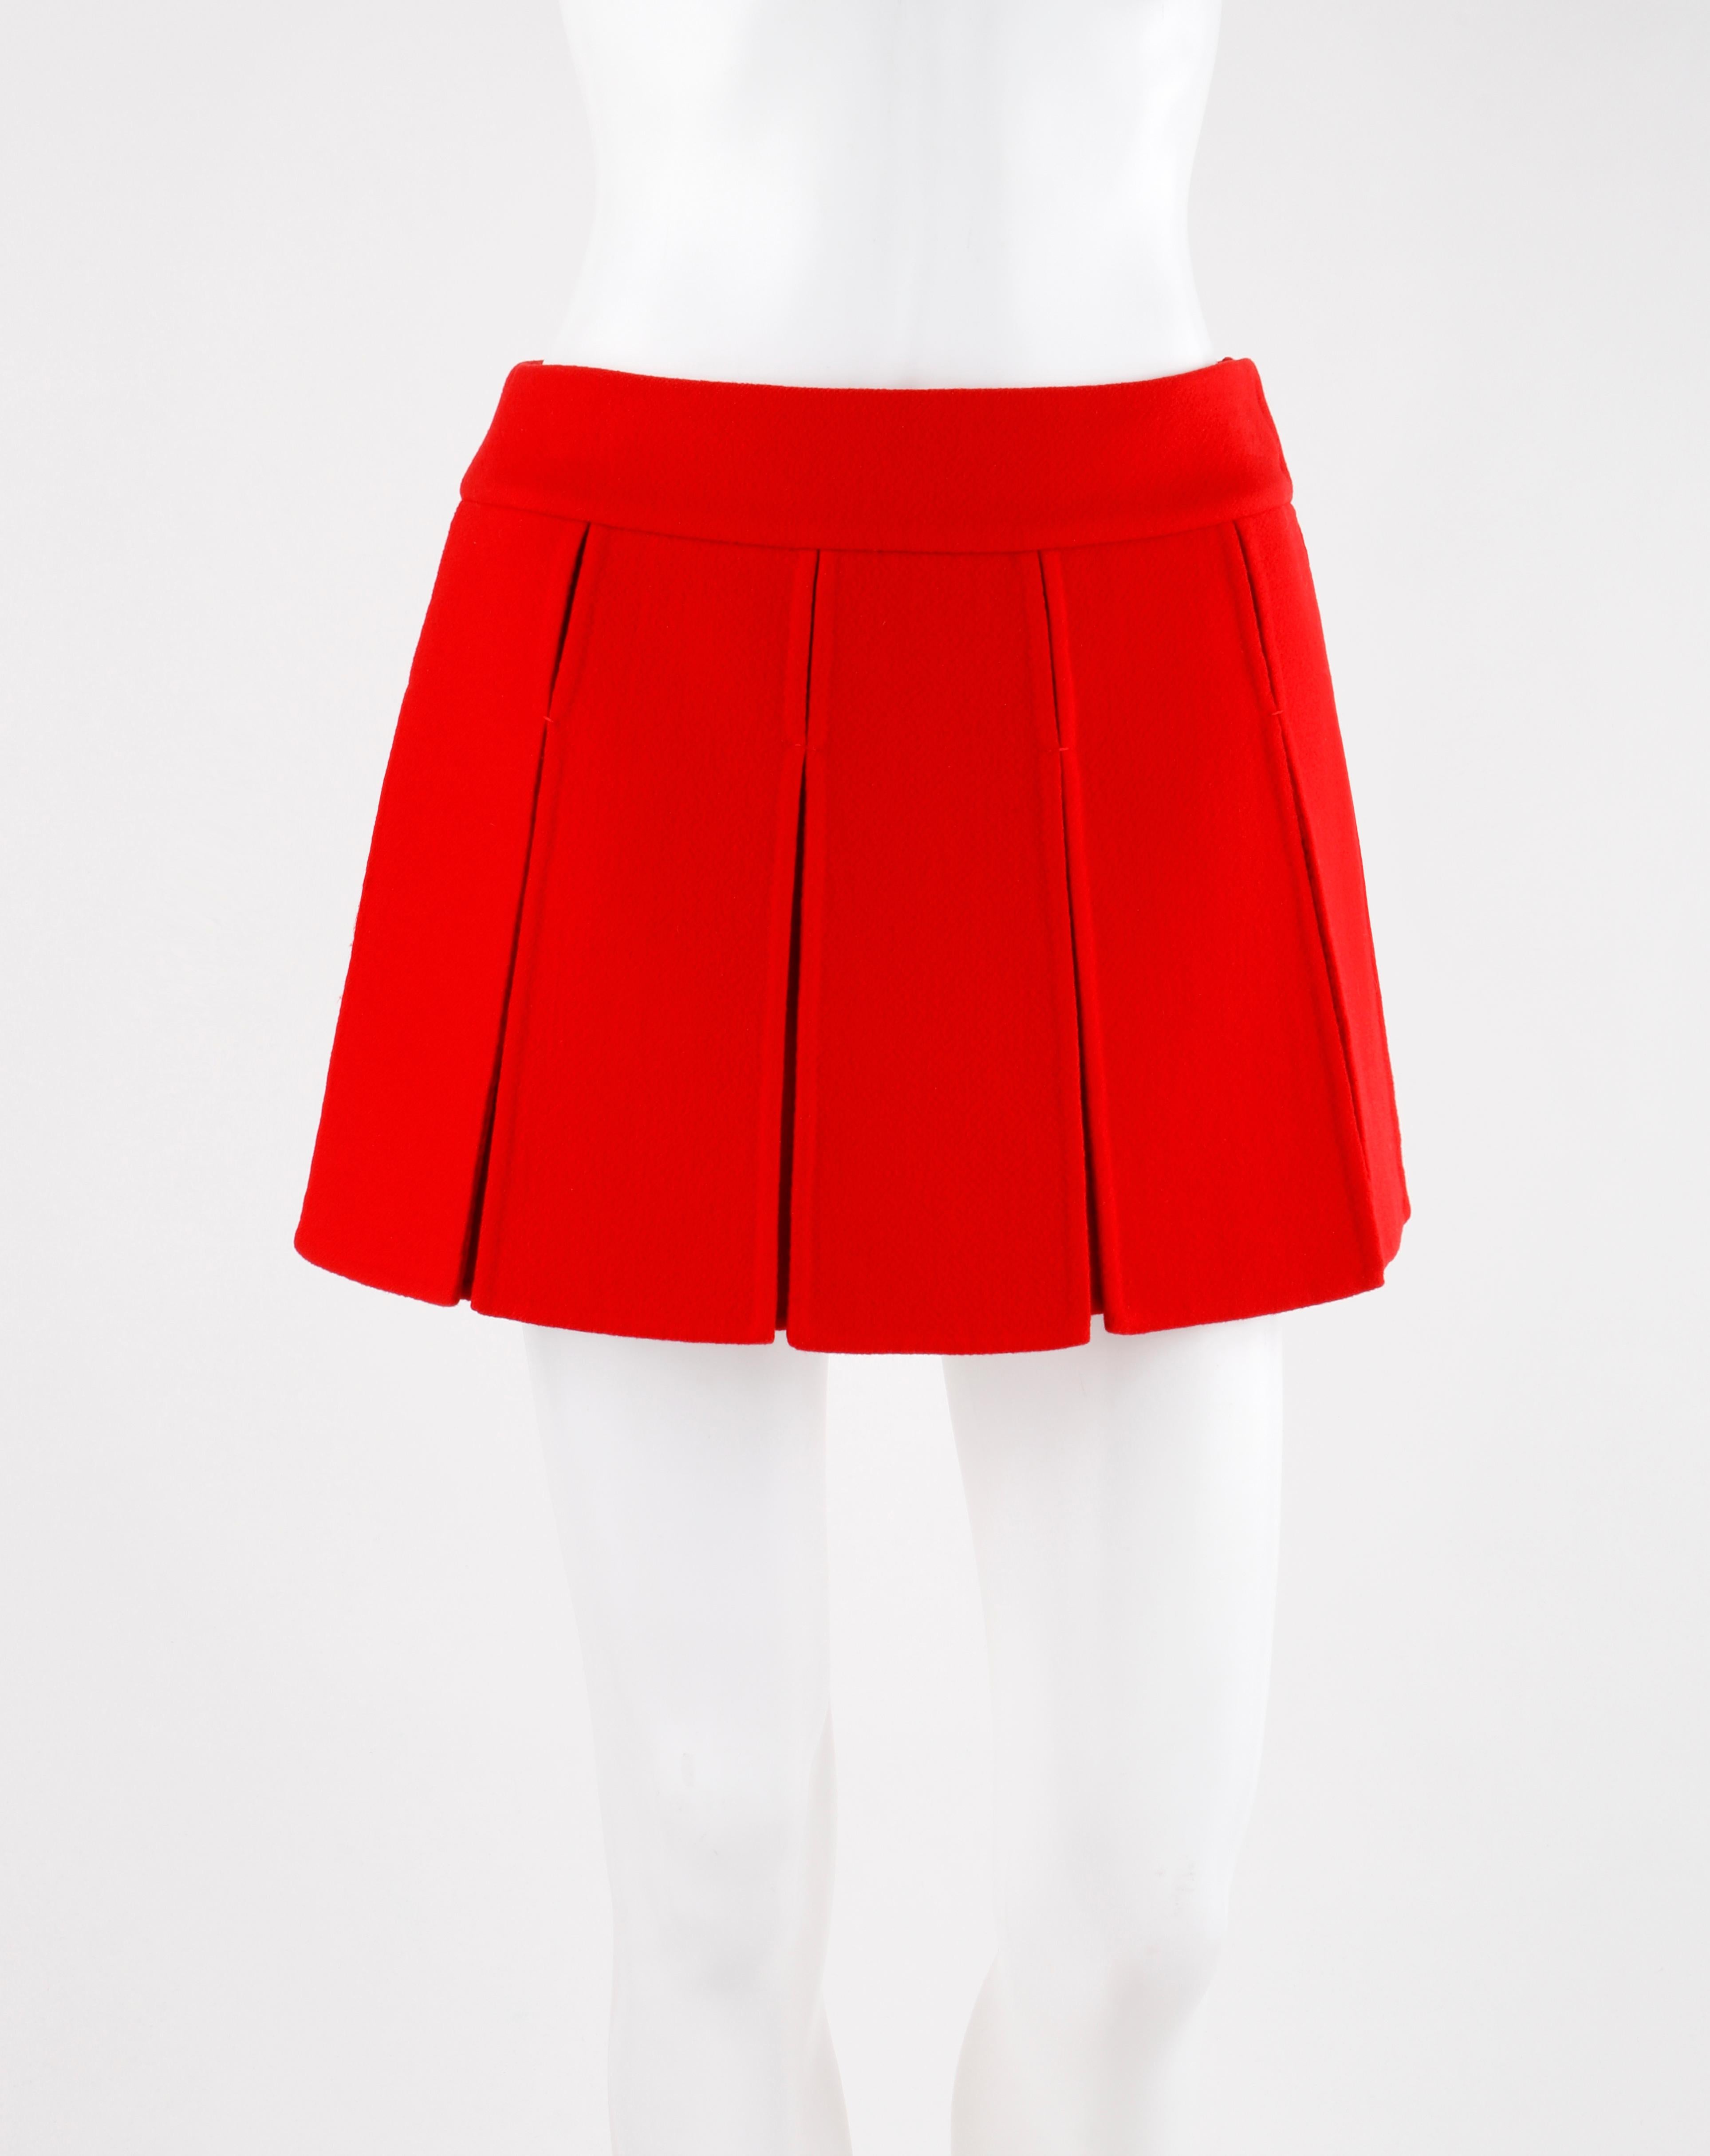 LOUIS VUITTON Red Cashmere Mini Gladiator Pleated Skirt

Brand / Manufacturer: Louis Vuitton
Collection: Ready to wear, fall 2003
Designer: Marc Jacobs
Style: Mini Pleated Skirt
Color(s): Red
Lined: Partially lined- waistband
Marked Fabric Content: